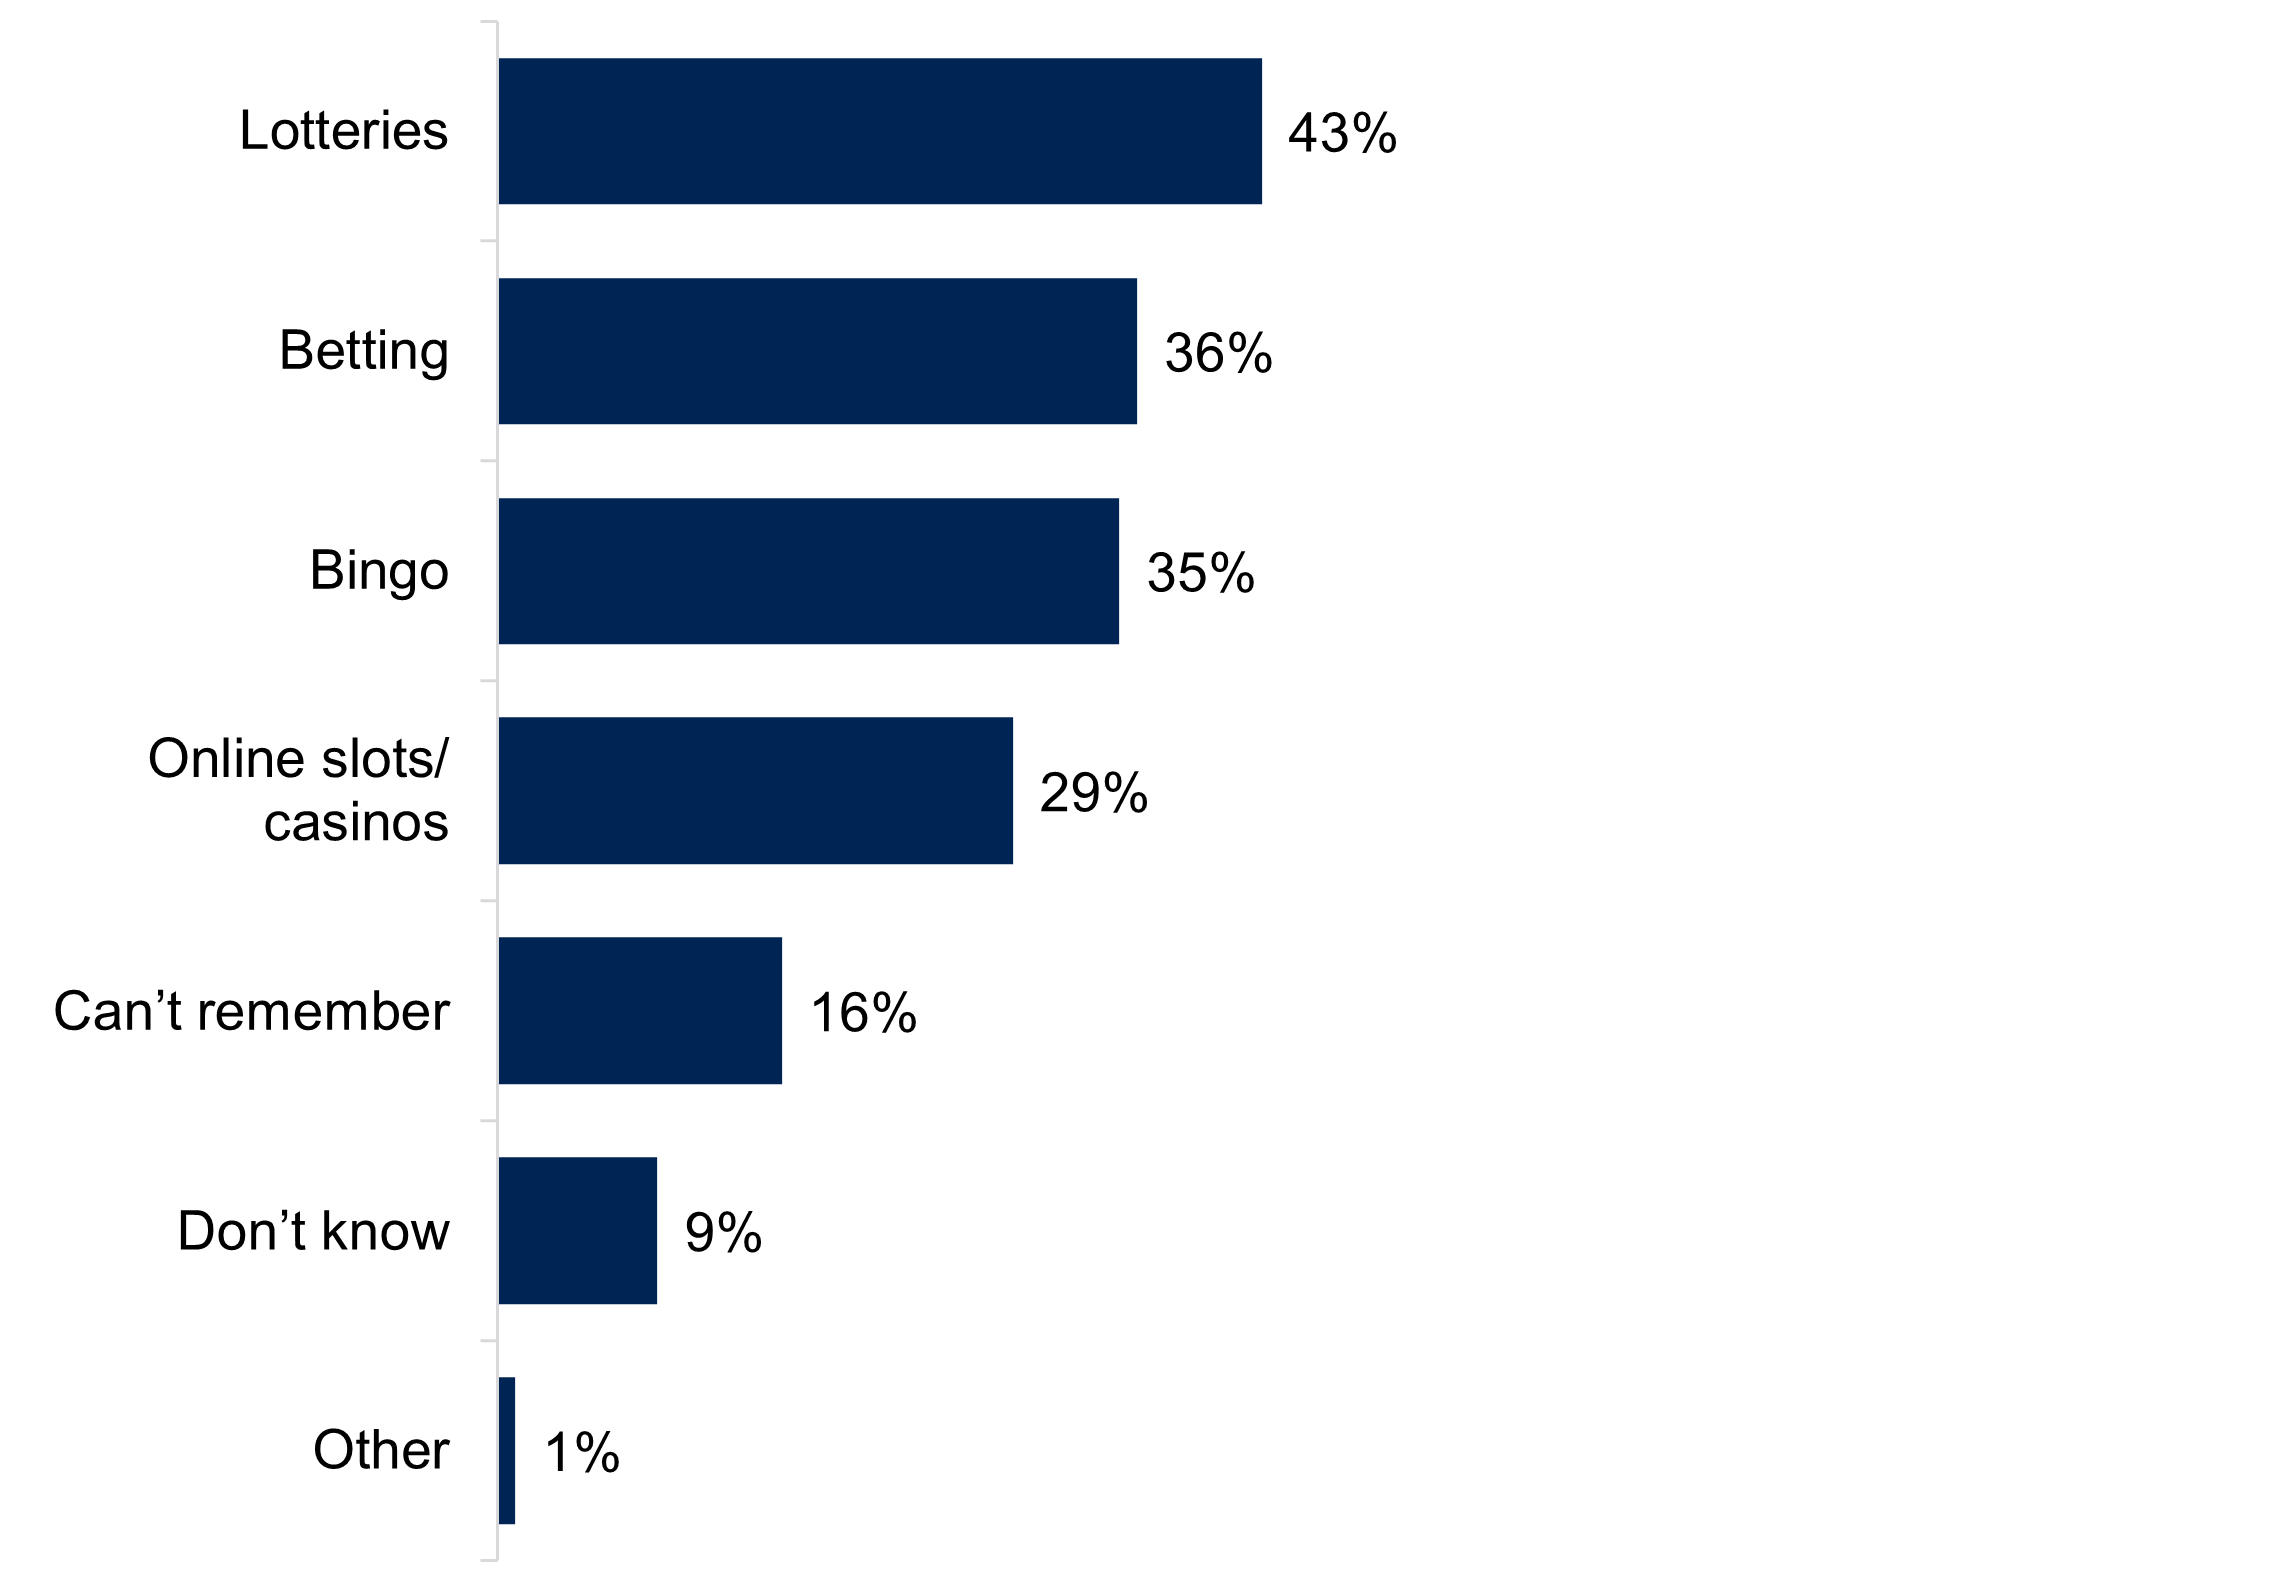 A bar chart showing the nature, from 'Online slot and/or casinos' to 'Lotteries', of gambling adverts seen. Data from the chart is provided within the following table.